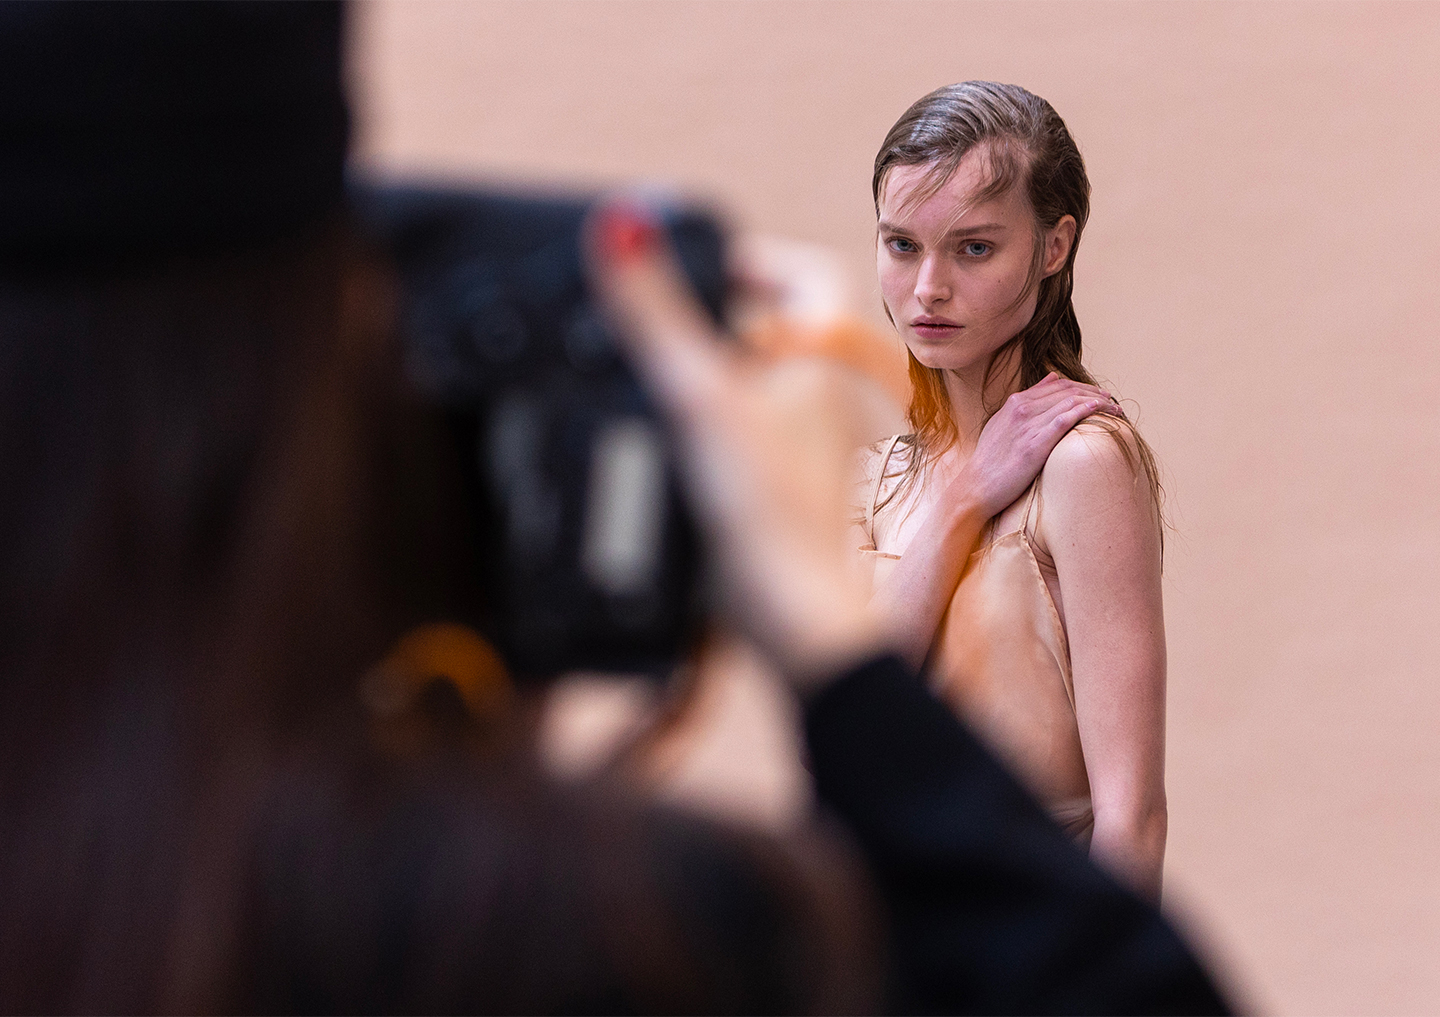 A backstage moment from the shoot by Istituto Marangoni Fashion Styling Masters student Benedetta de Martino